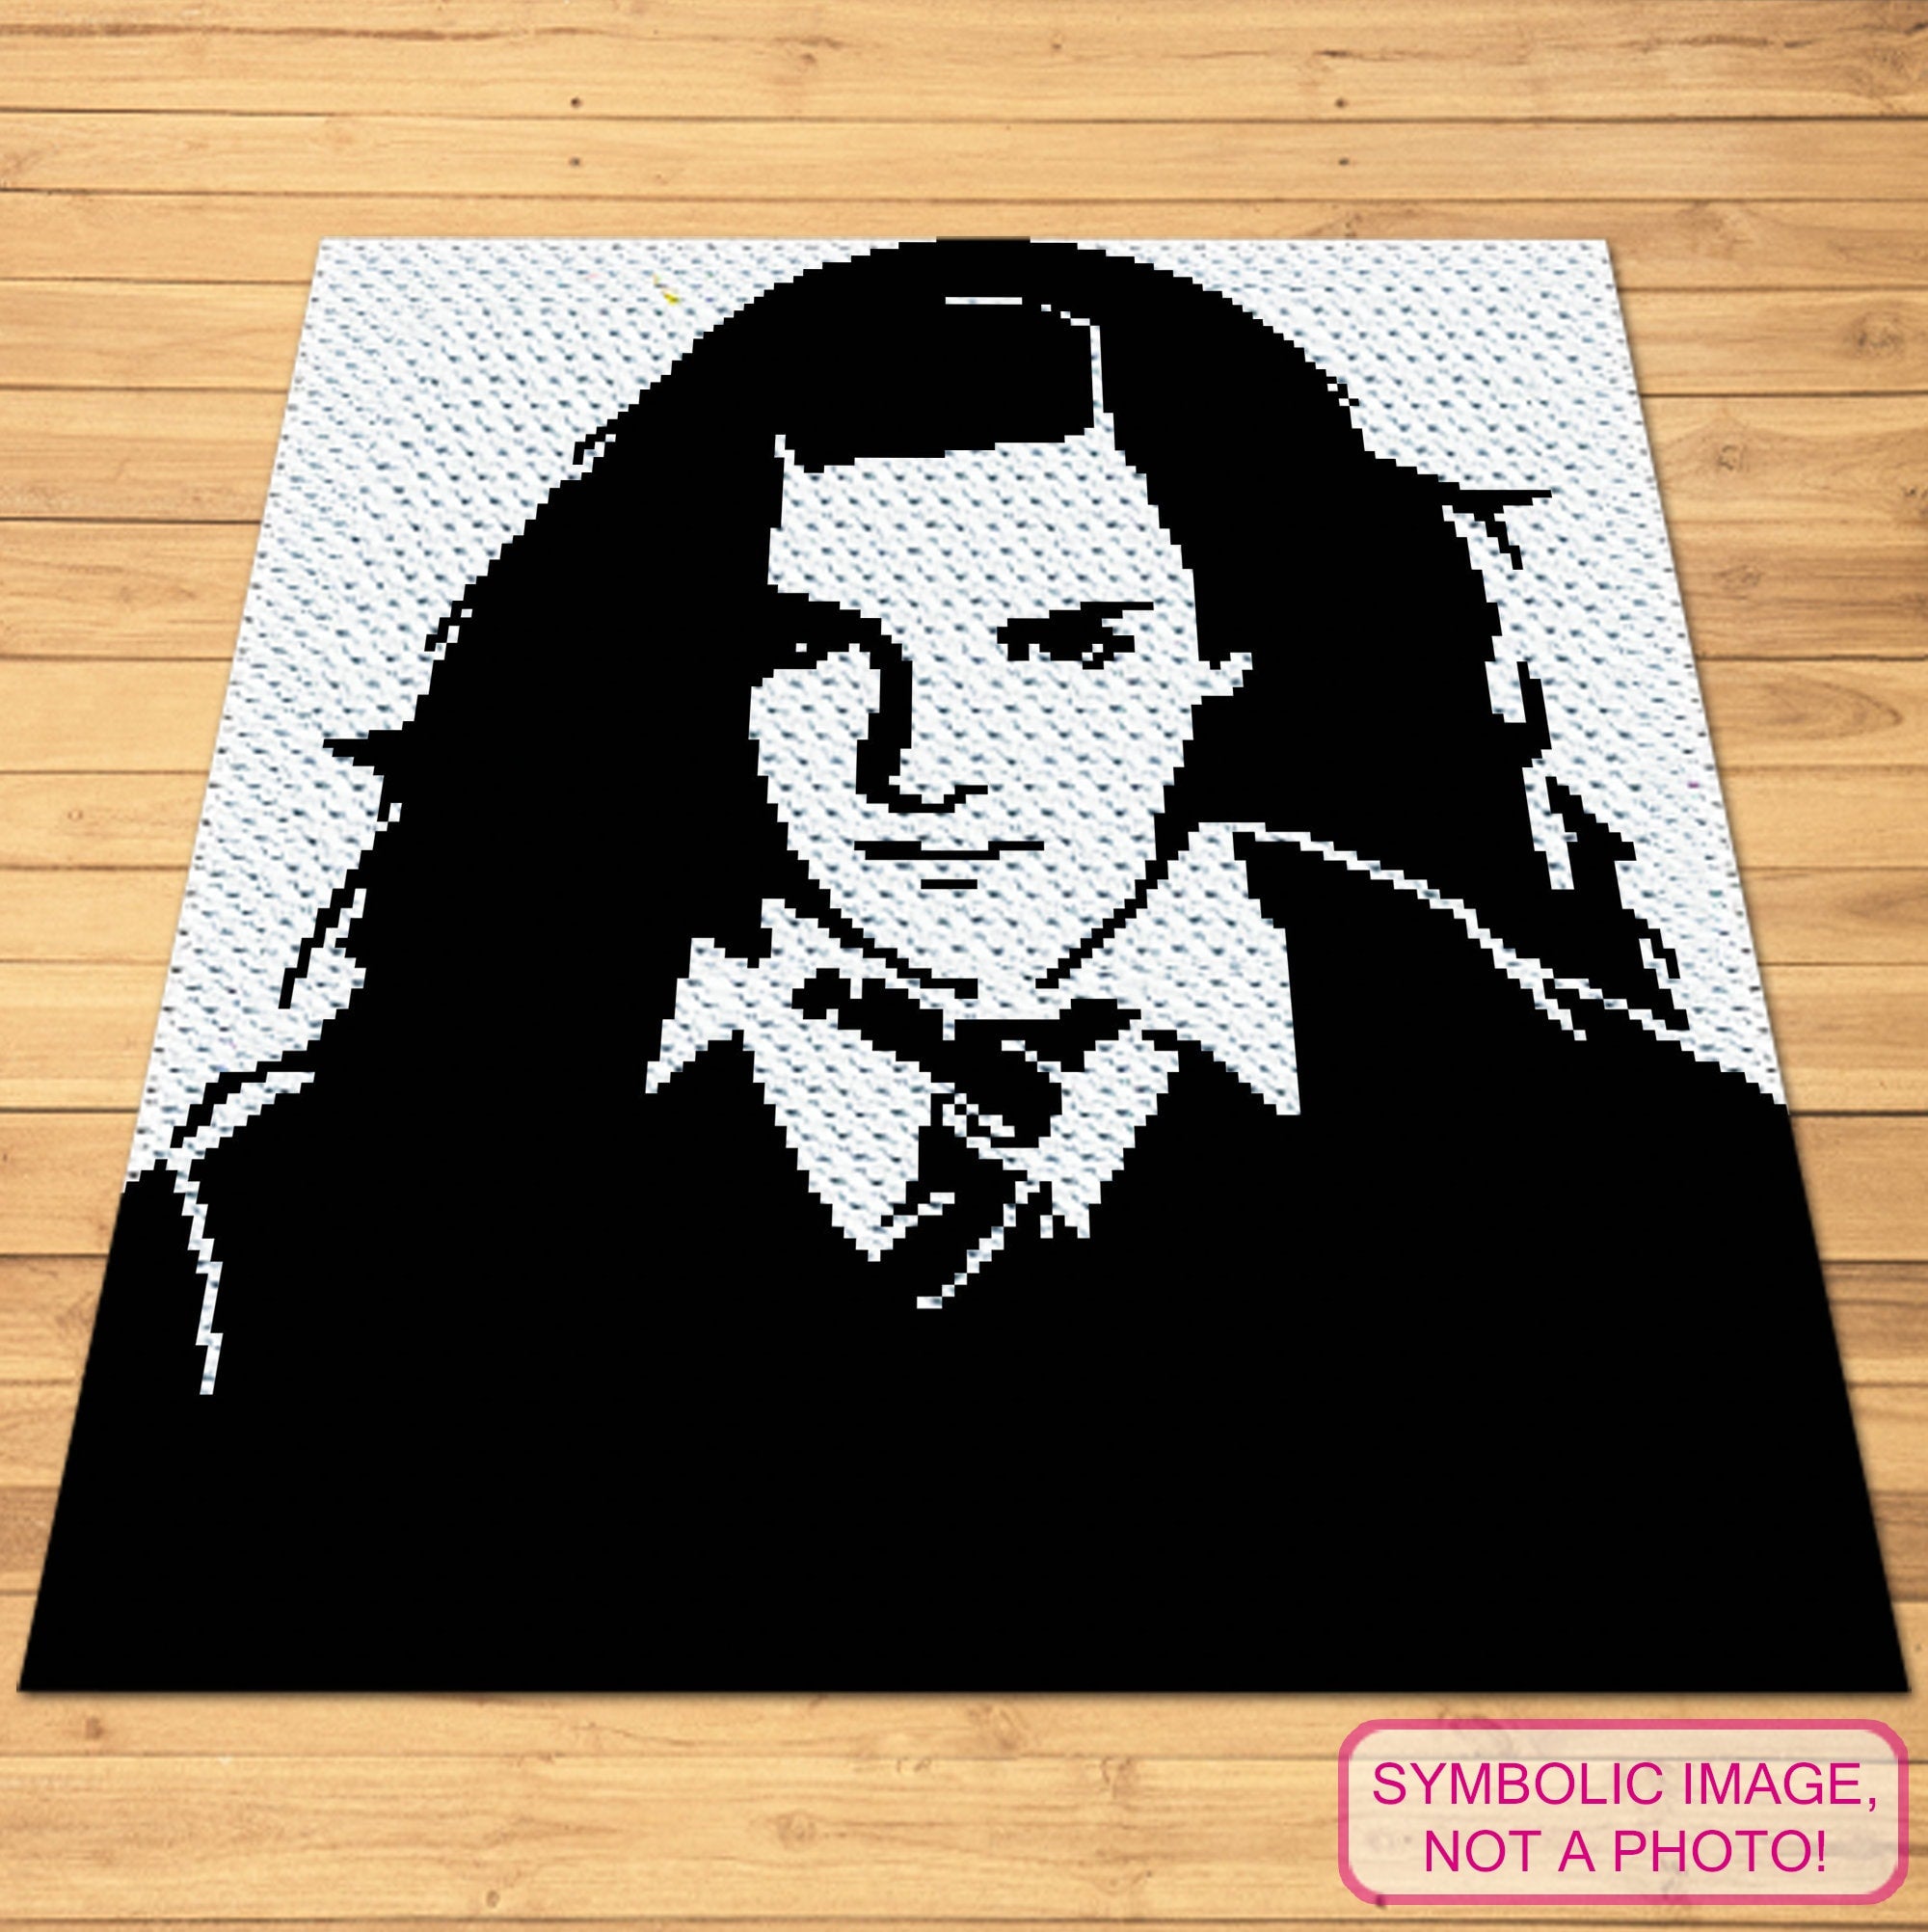 Harry Potter Patterns - Crochet Celebrity Emma Watson is a Graph Pattern with Written Instructions for a Corner to Corner Crochet Blanket Pattern. Click to learn more!